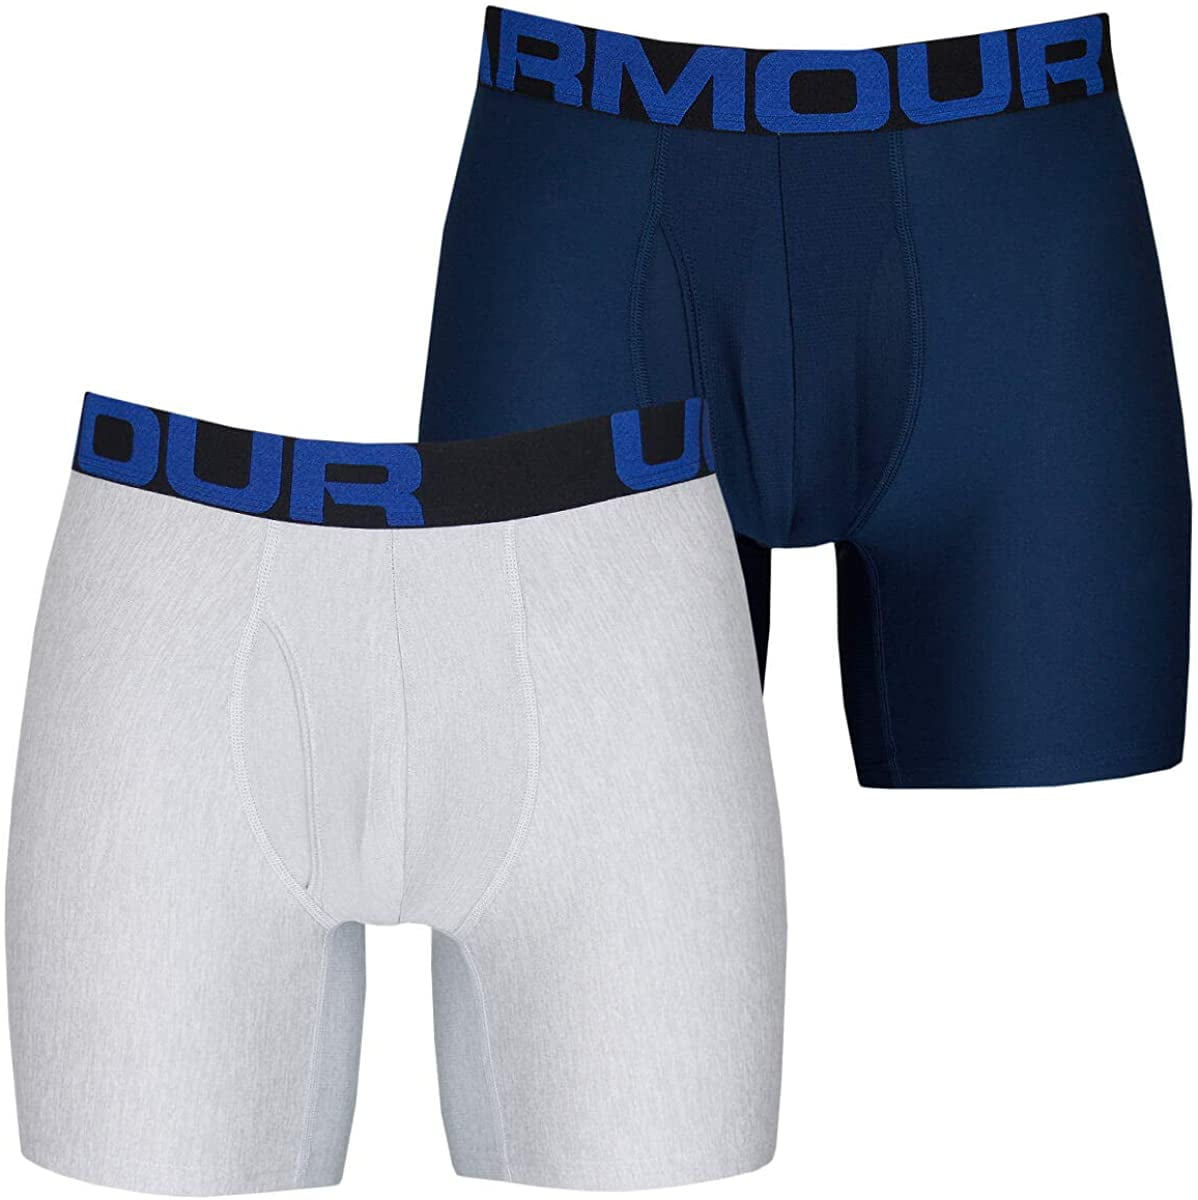 Under Armour Mens Tech 6in 2 Pack Novelty Boxer Jock 